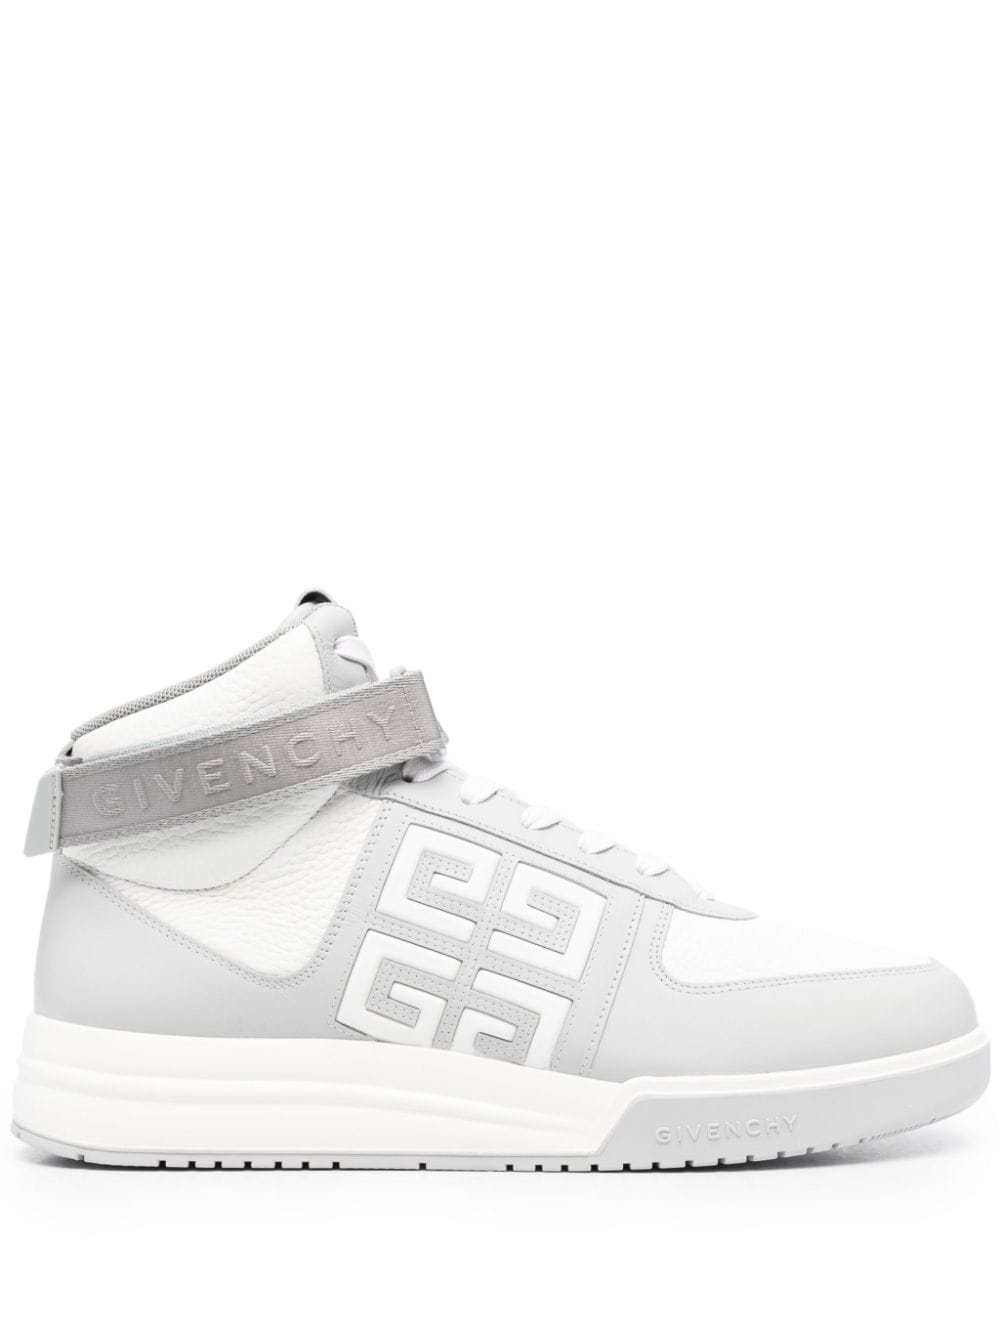 Givenchy G4 logo-print sneakers - Grey von Givenchy